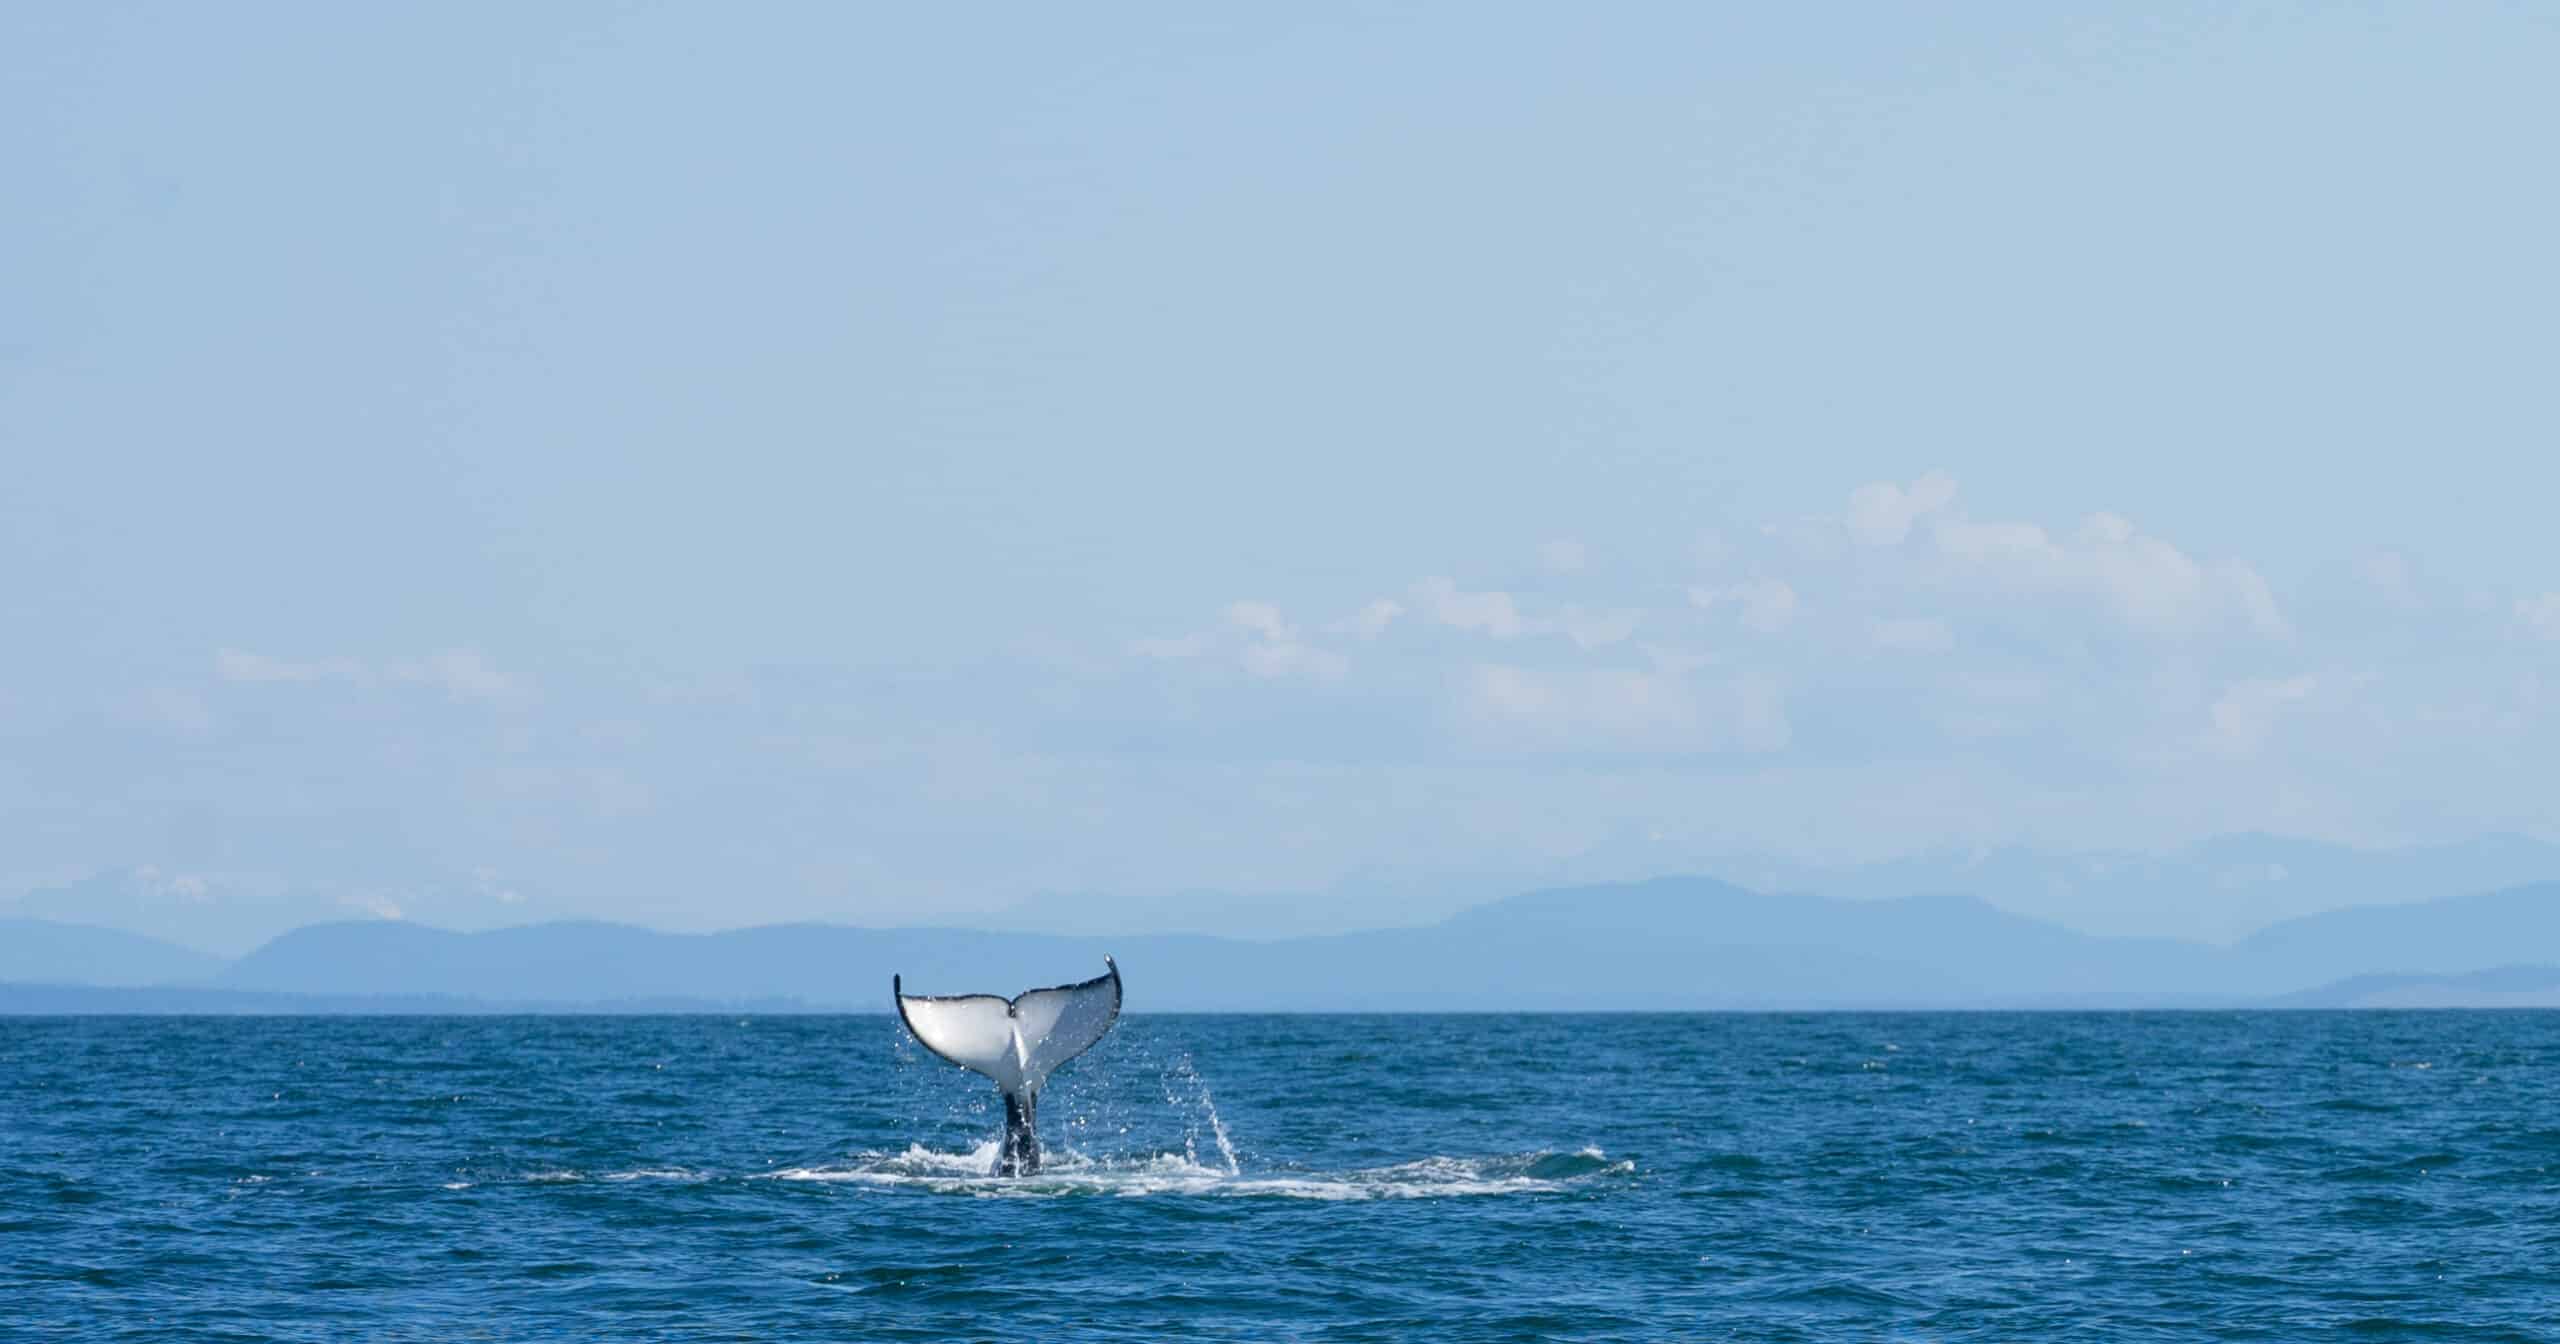 https://www.discovercanadatours.com/wp-content/uploads/2022/05/©LisanneSmeele-Whalewatching-13-scaled-e1657564572773.jpg